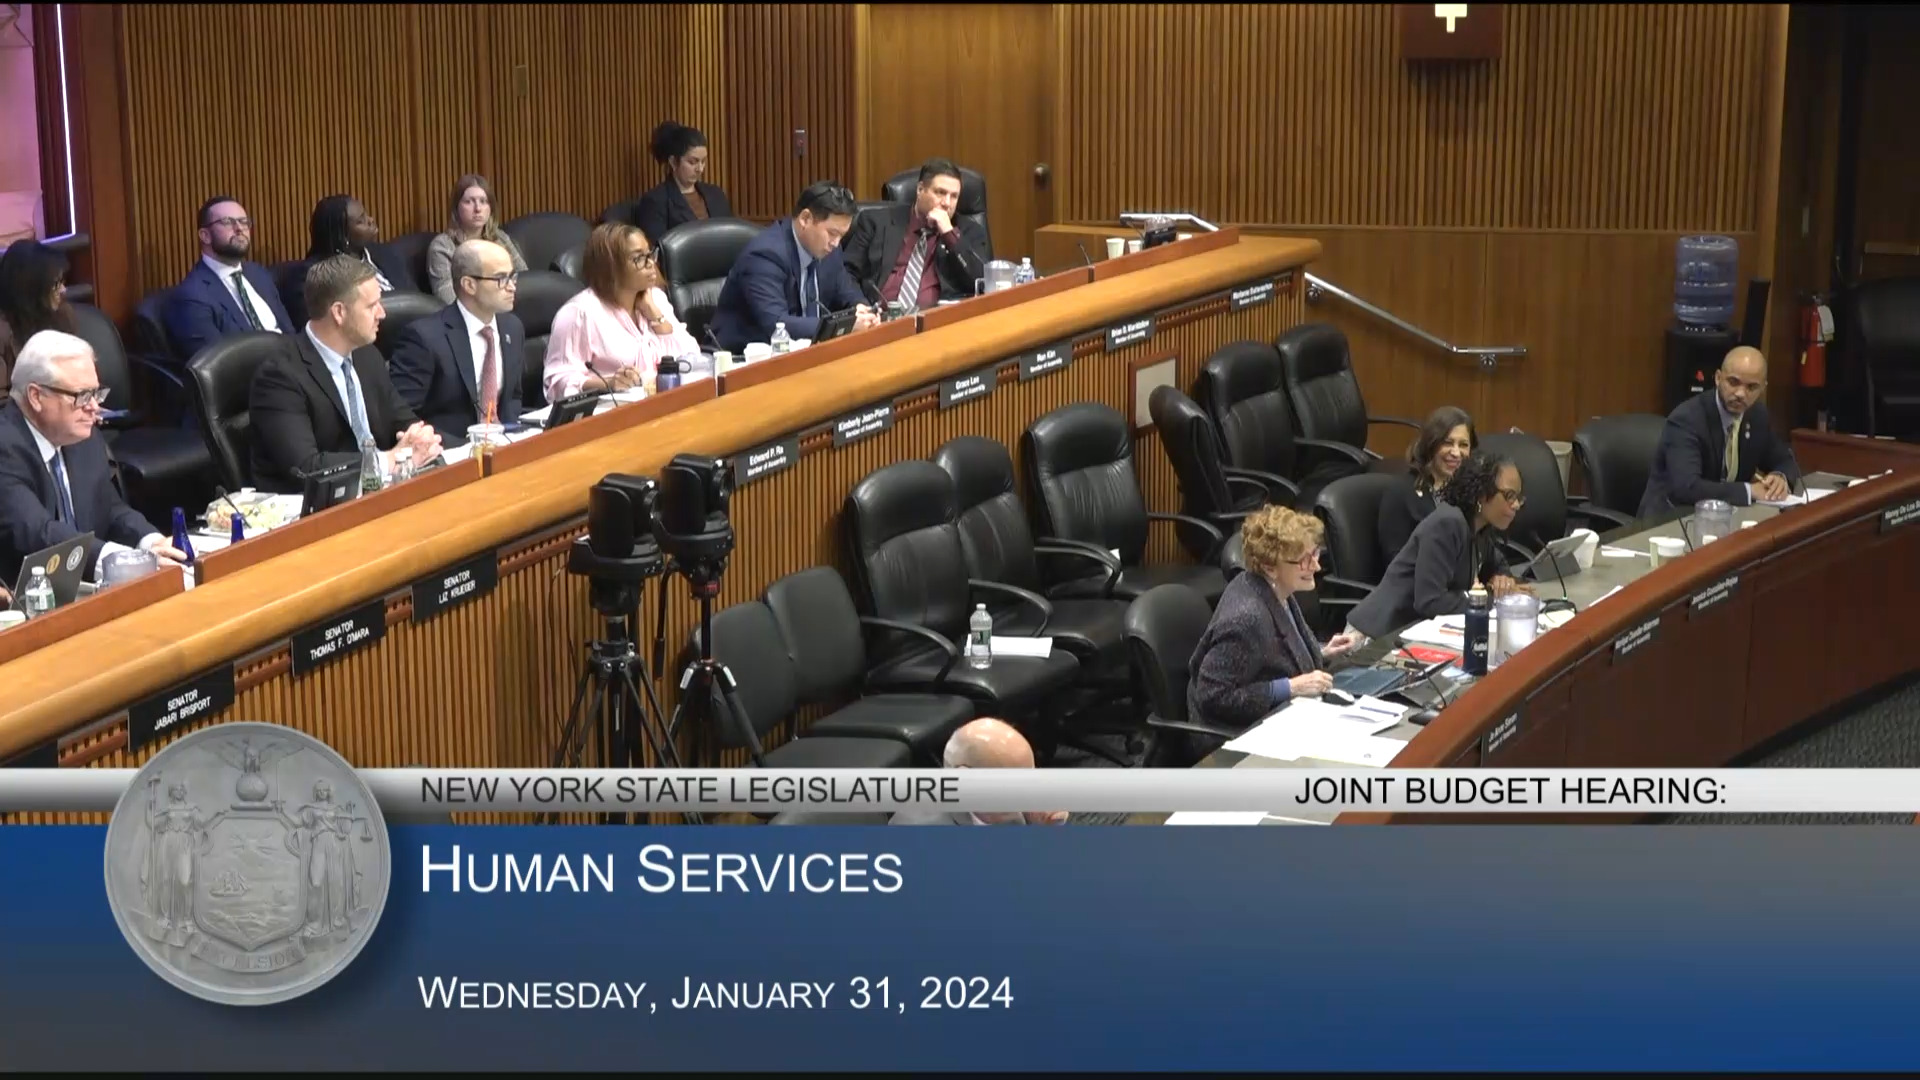 State Commissioners Testify During Budget Hearing on Human Services